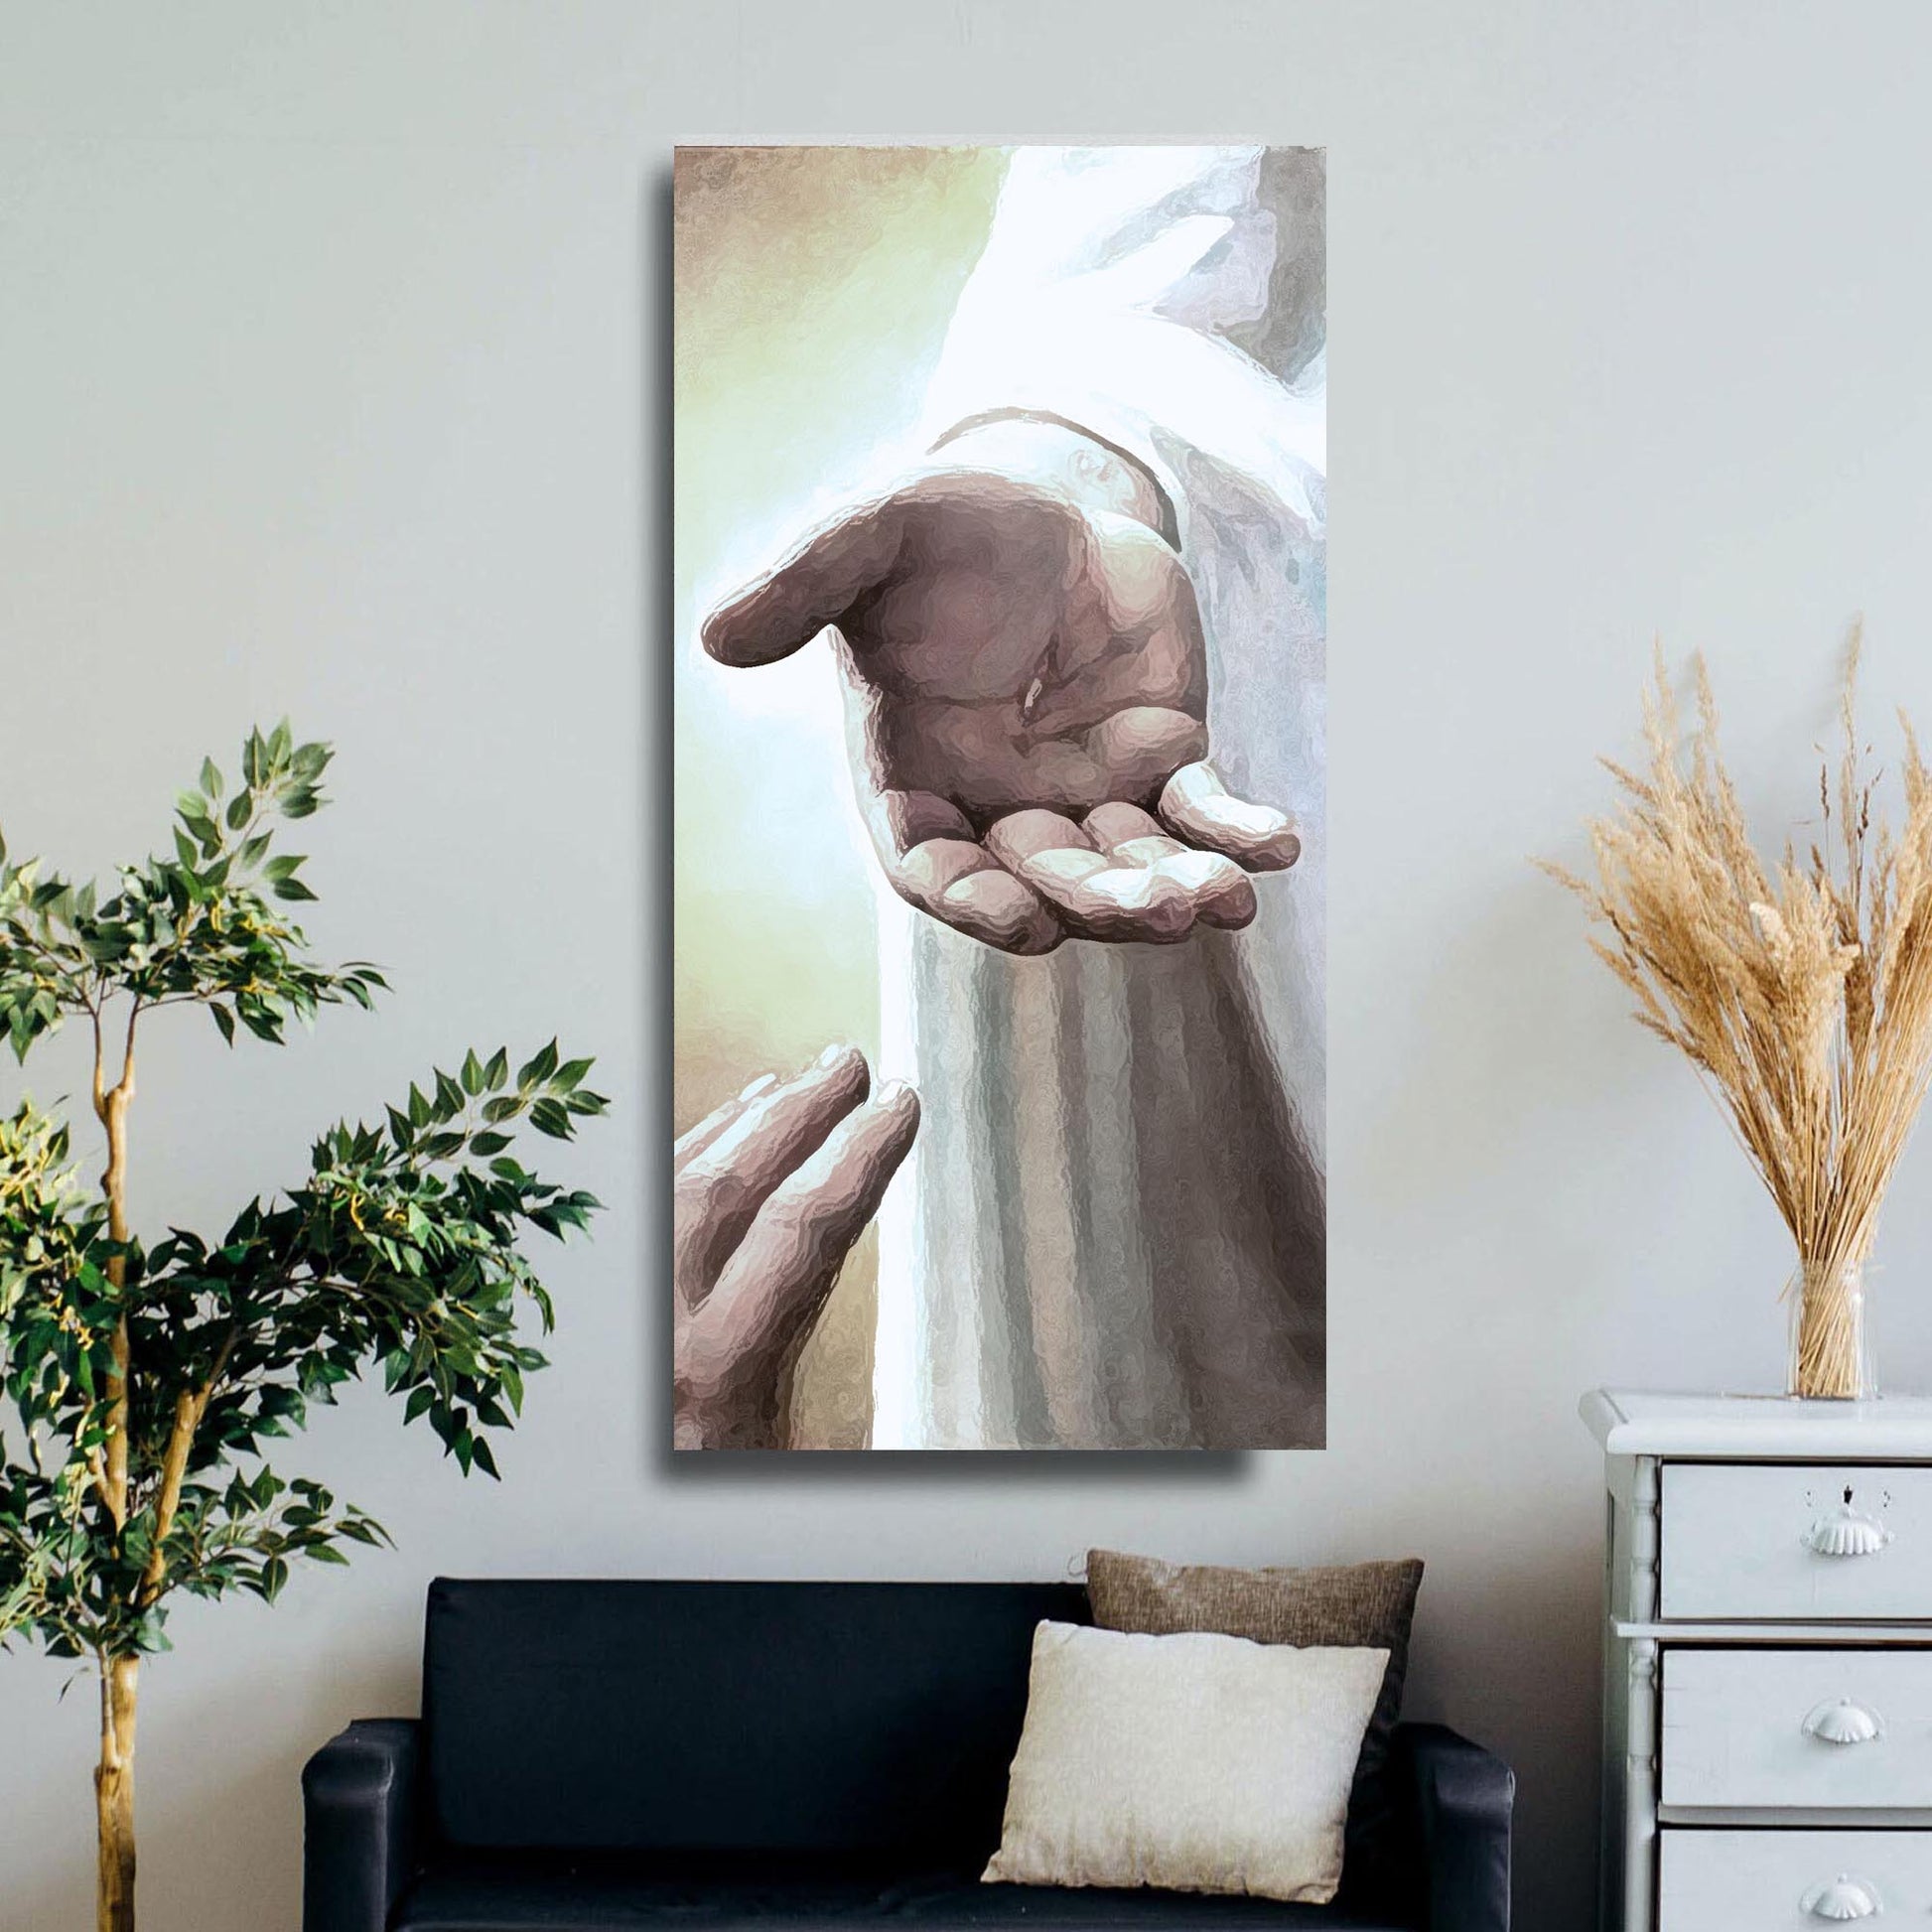 Take My Hand Canvas Wall Art - Image by Tailored Canvases